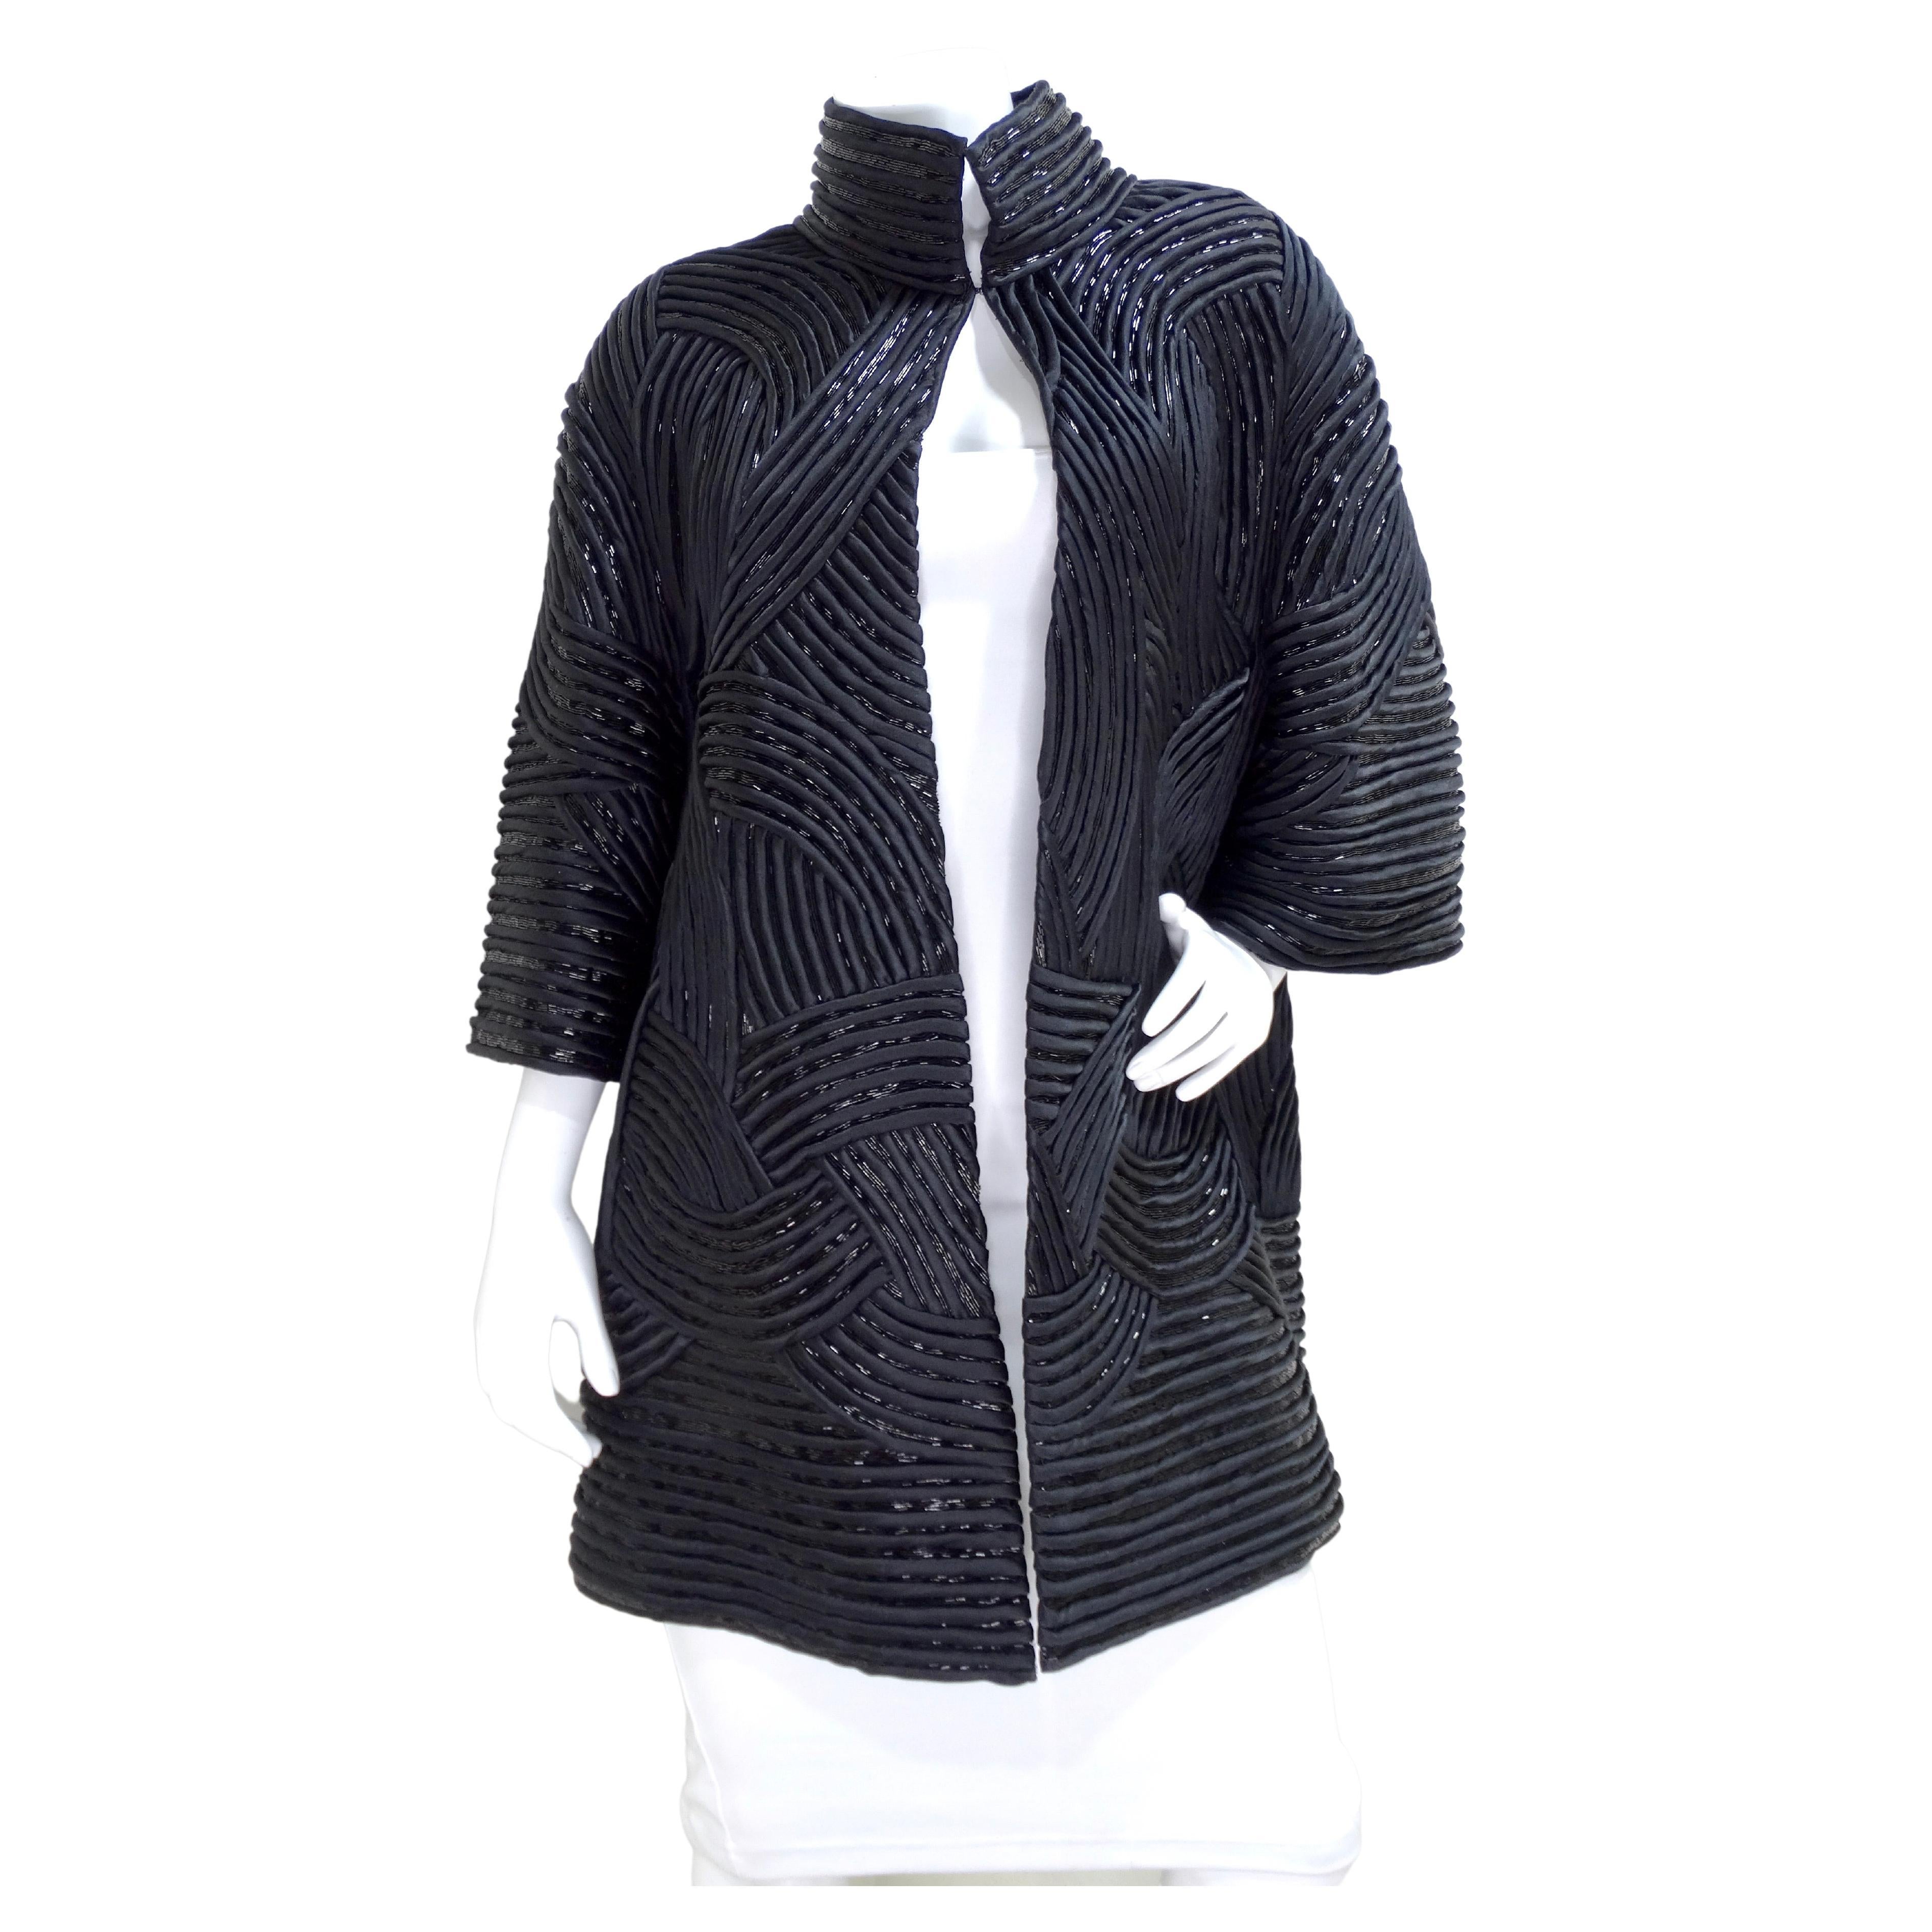 Snag this beautiful piece of John Anthony today! This is a very rare one of a kind and unique find that you need in your wardrobe! Zoom in on this jacket to not miss the intricate details. This is a highly textured black satin material is covered in